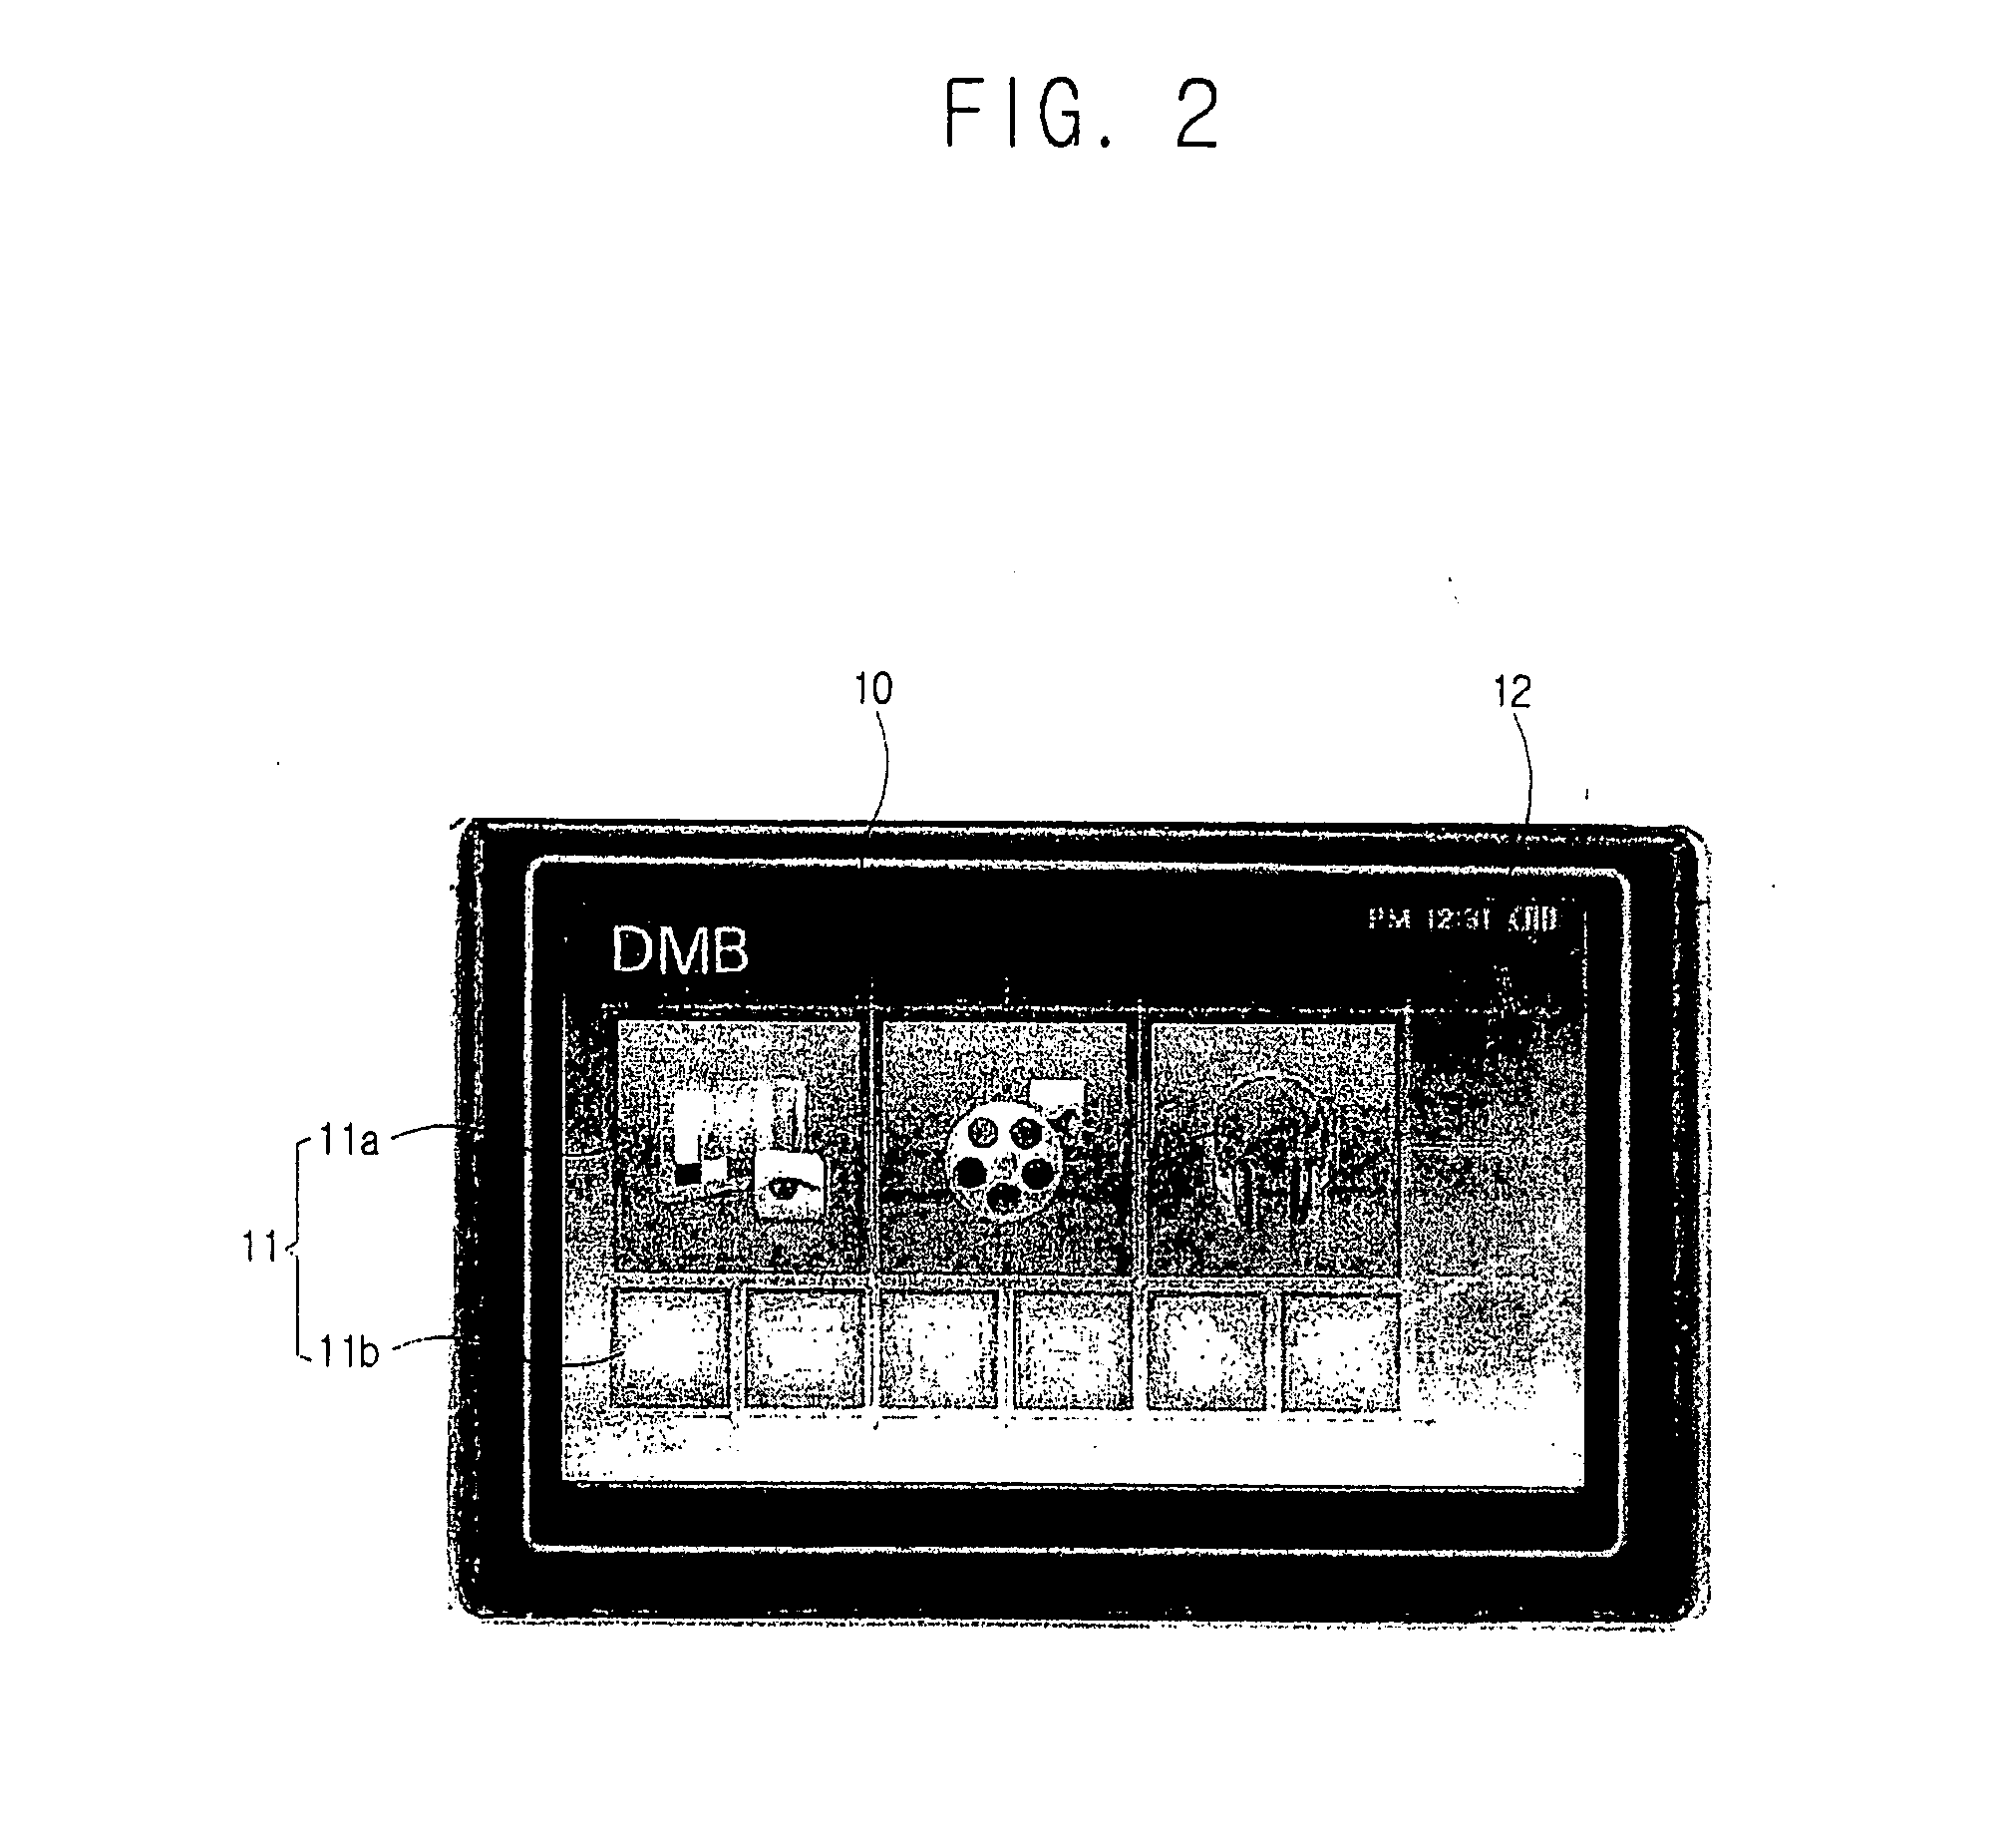 Display apparatus, image processing apparatus and control method thereof